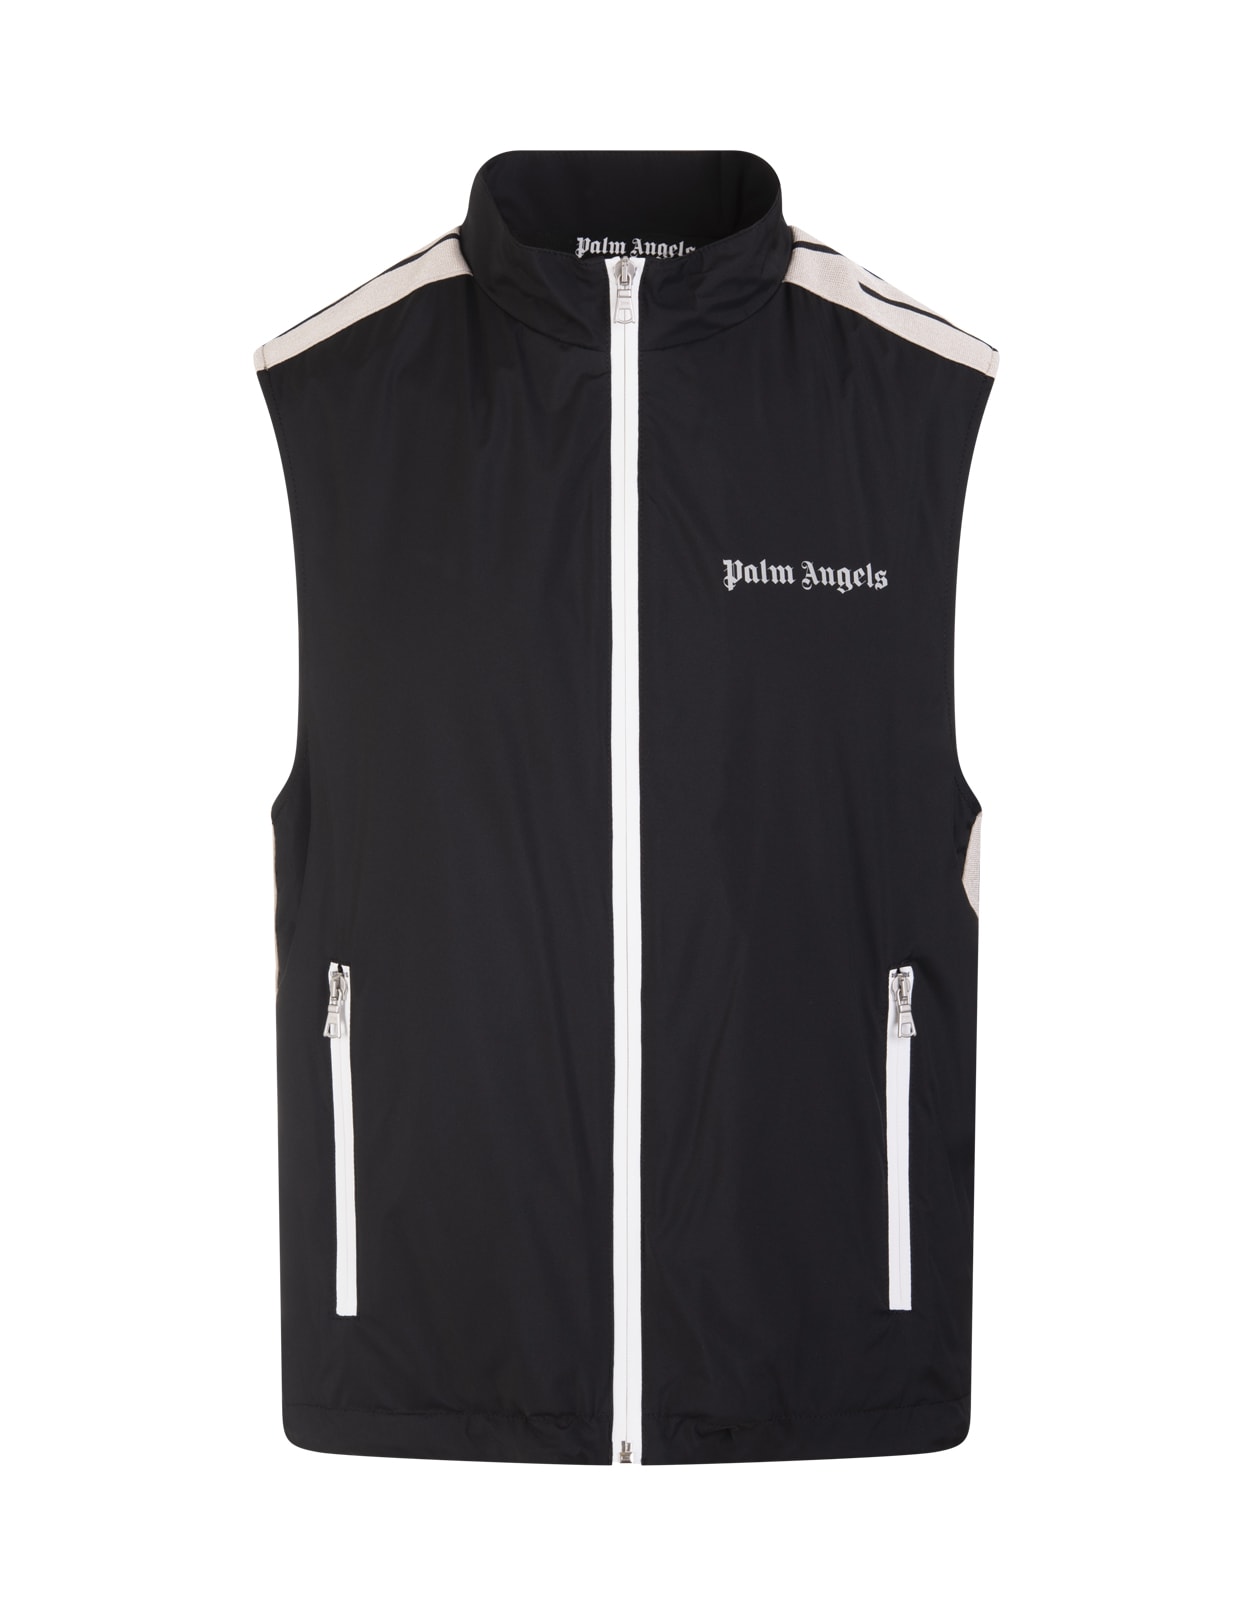 Palm Angels Man Sleeveless Jacket In Black And White Technical Fabric